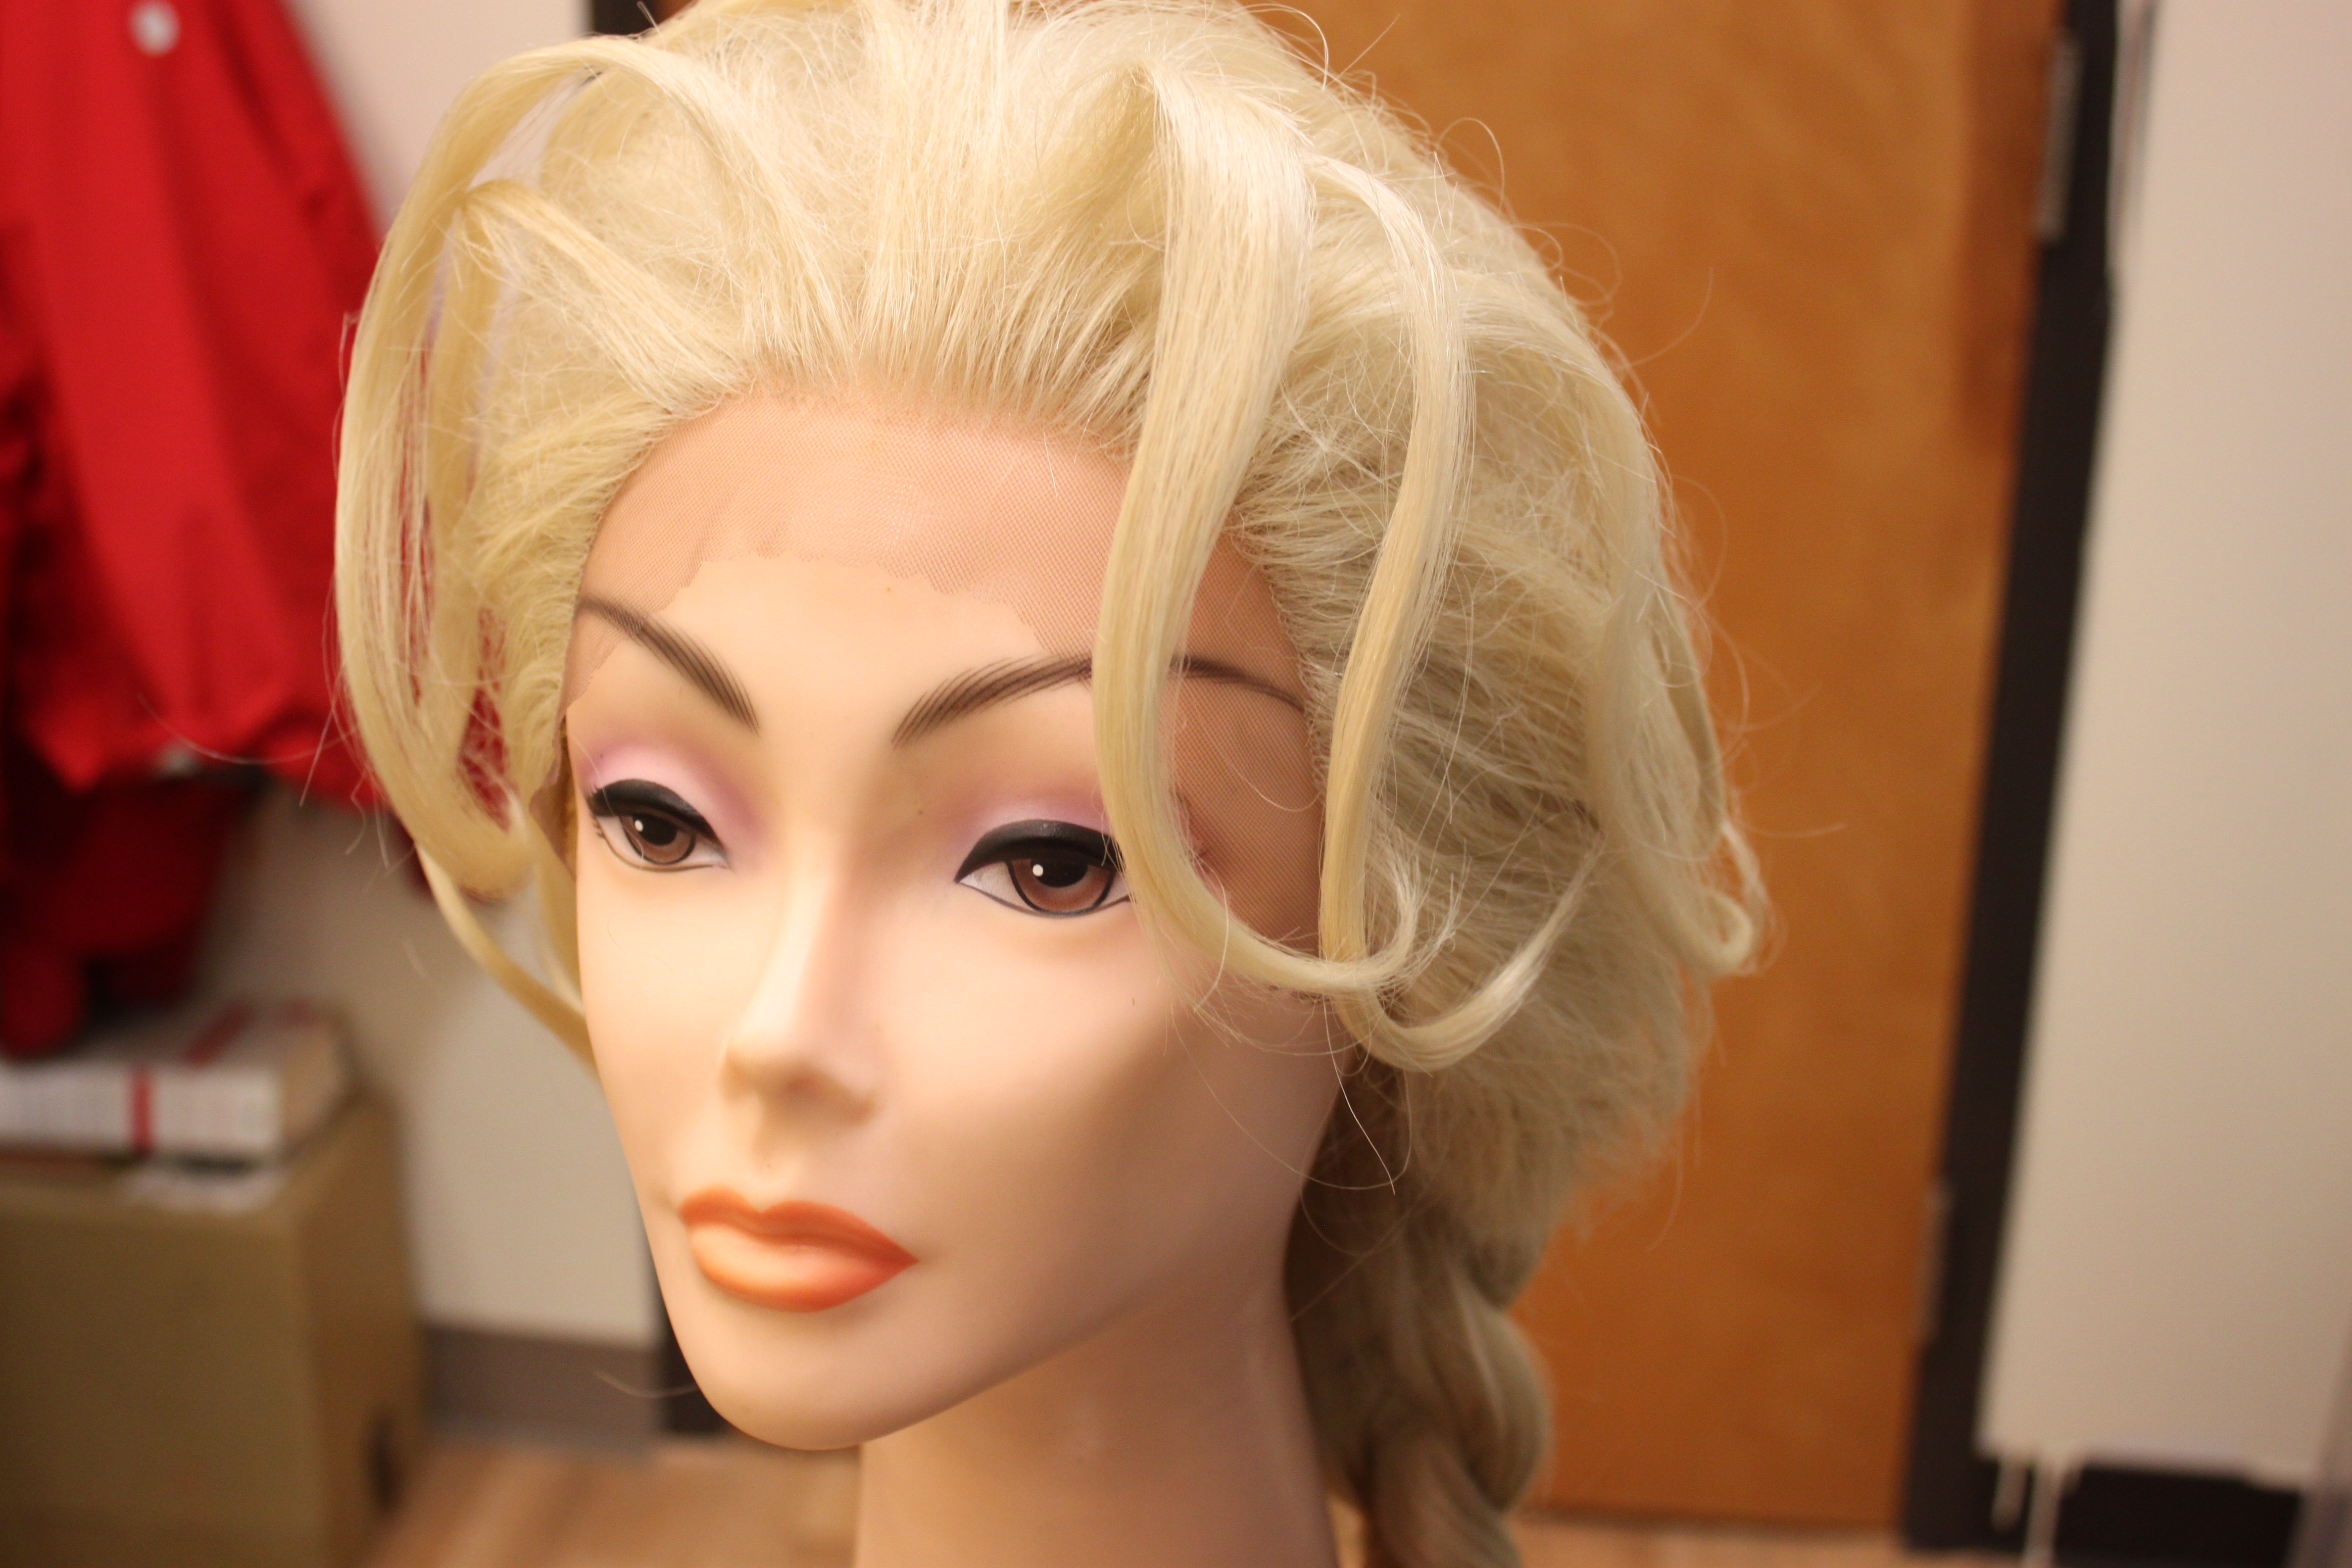 James Hoagland has made nine Elsa wigs. He says the drag queen business is very tied to pop culture. (Photo by Lisa Phu/KTOO)